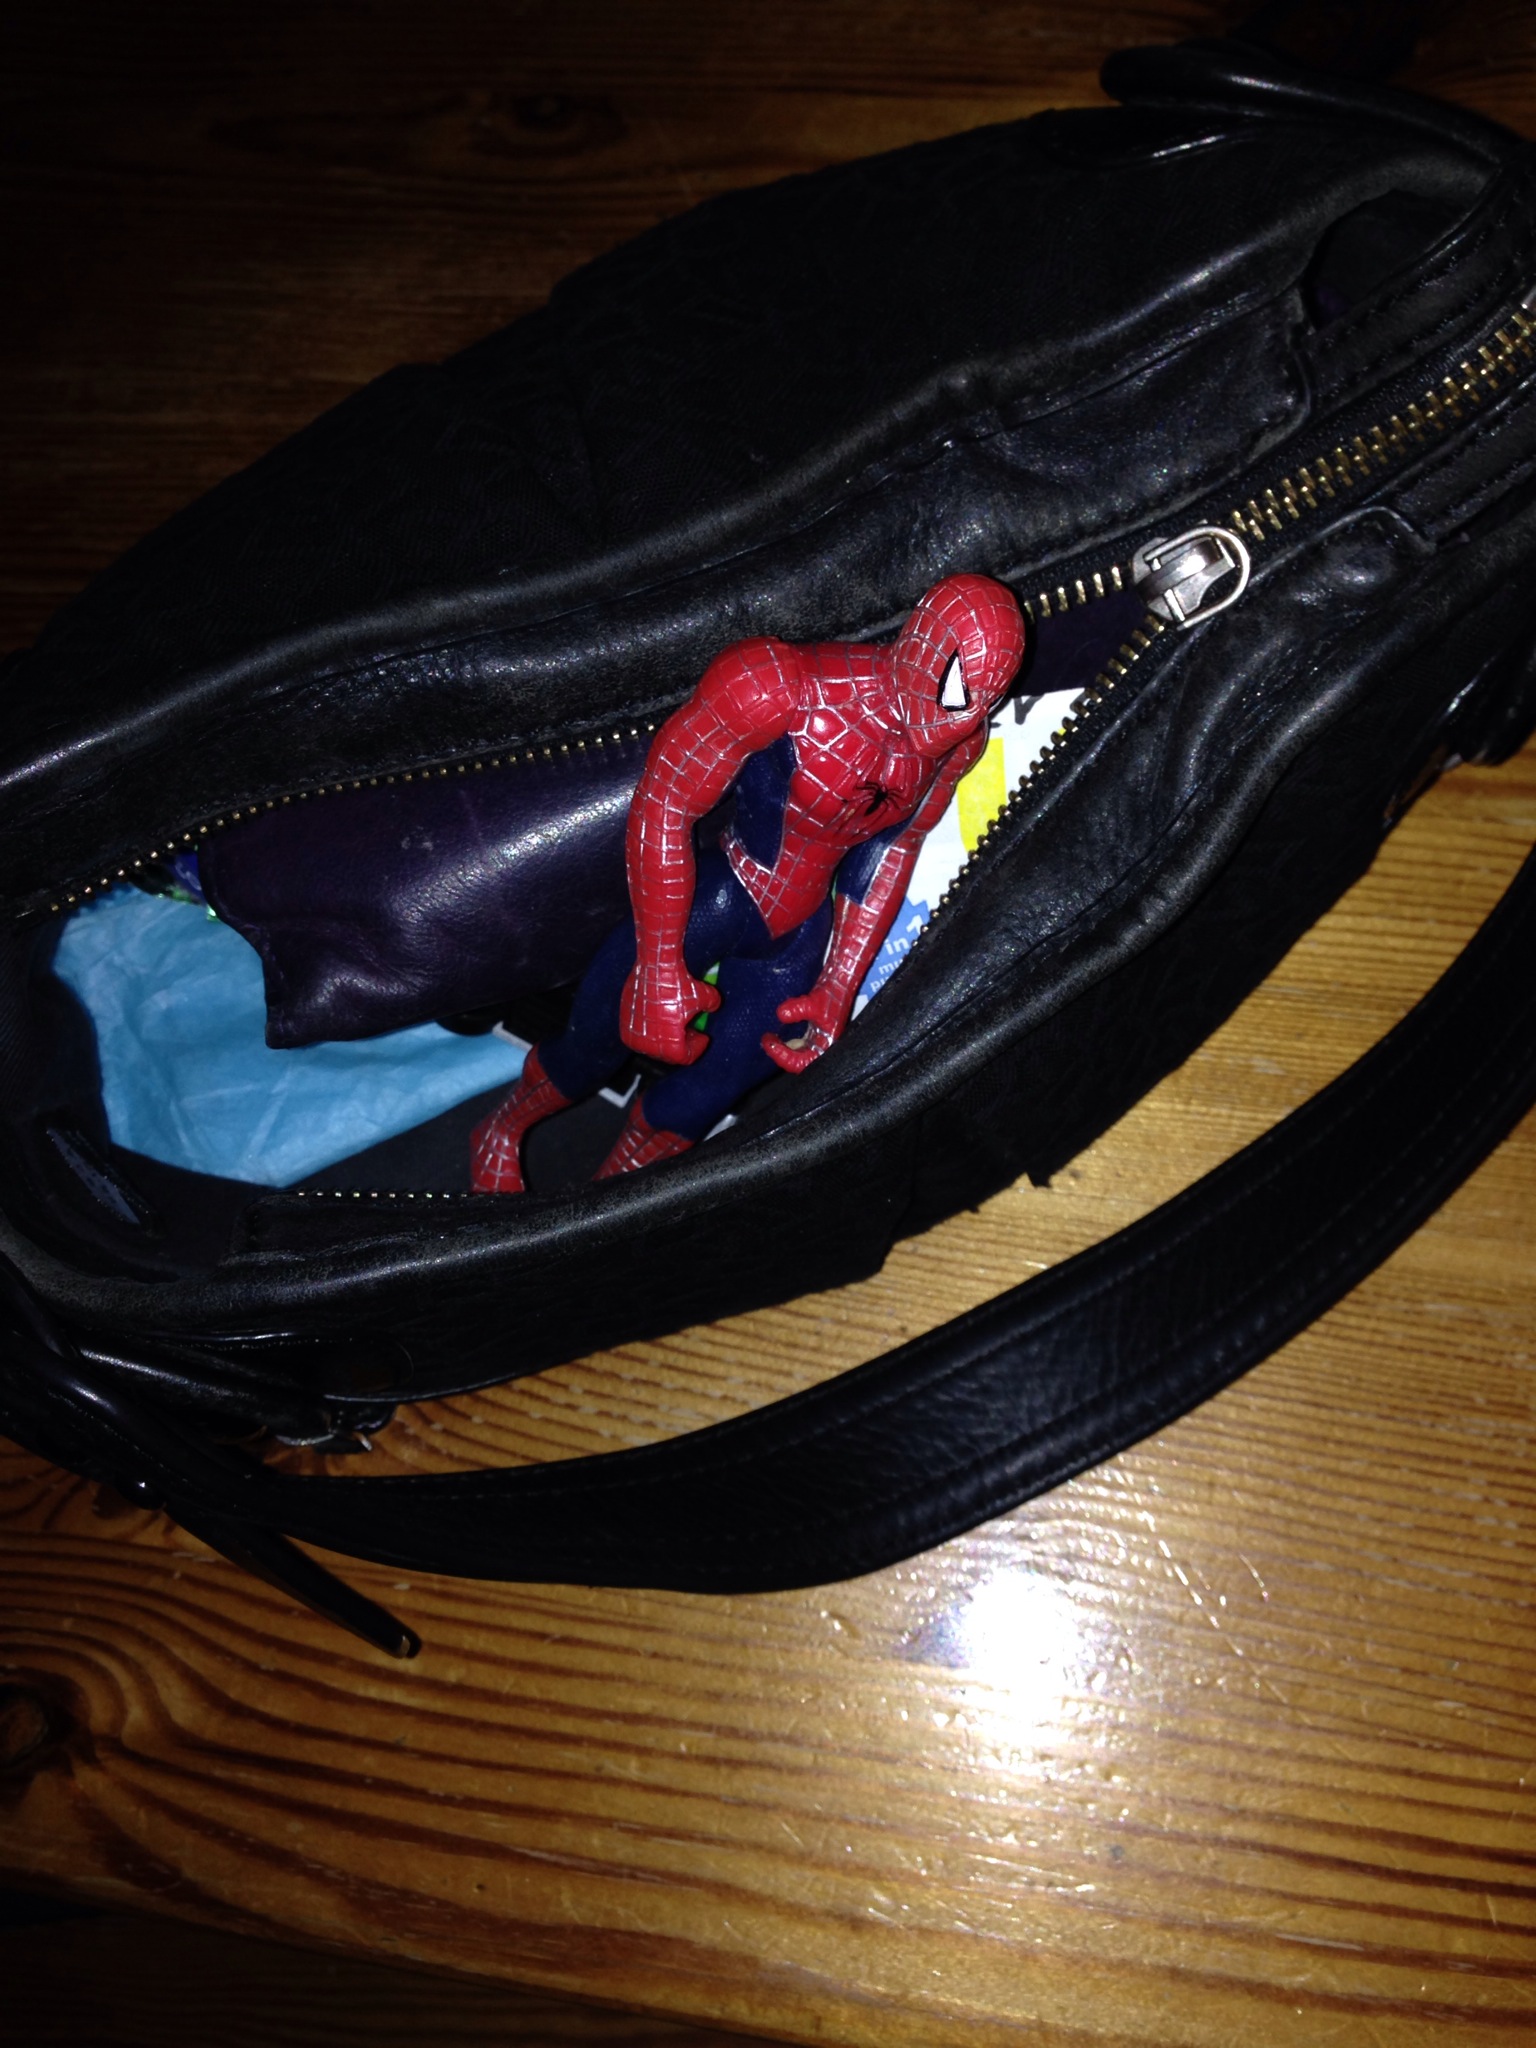 I pulled Spider-Man out of my bag instead of a pen